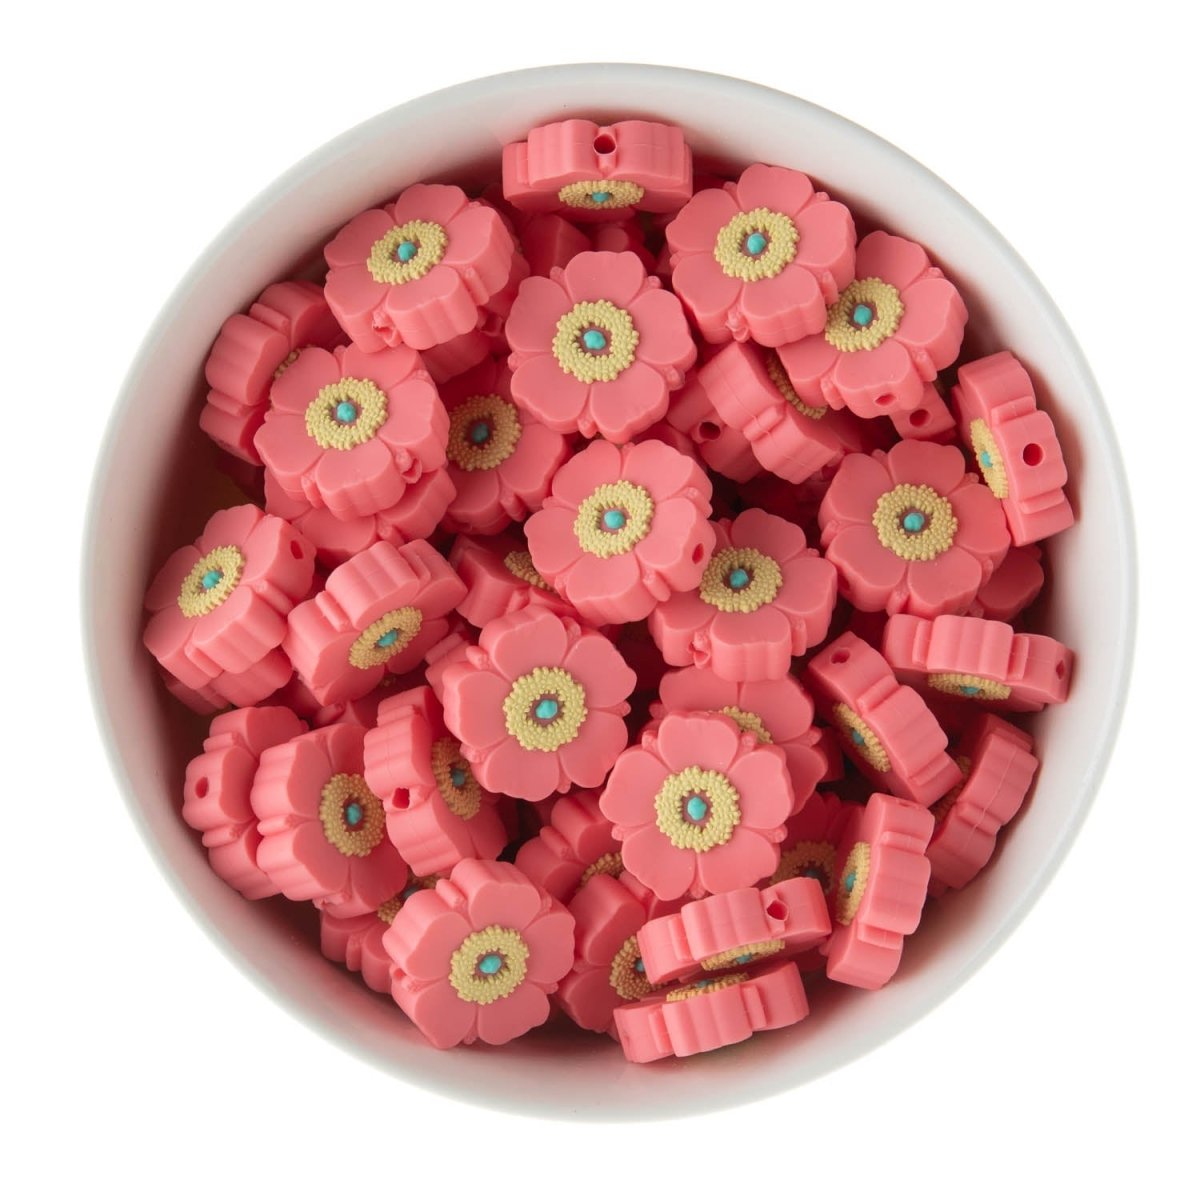 Silicone Focal Beads Poppies Starburst from Cara & Co Craft Supply